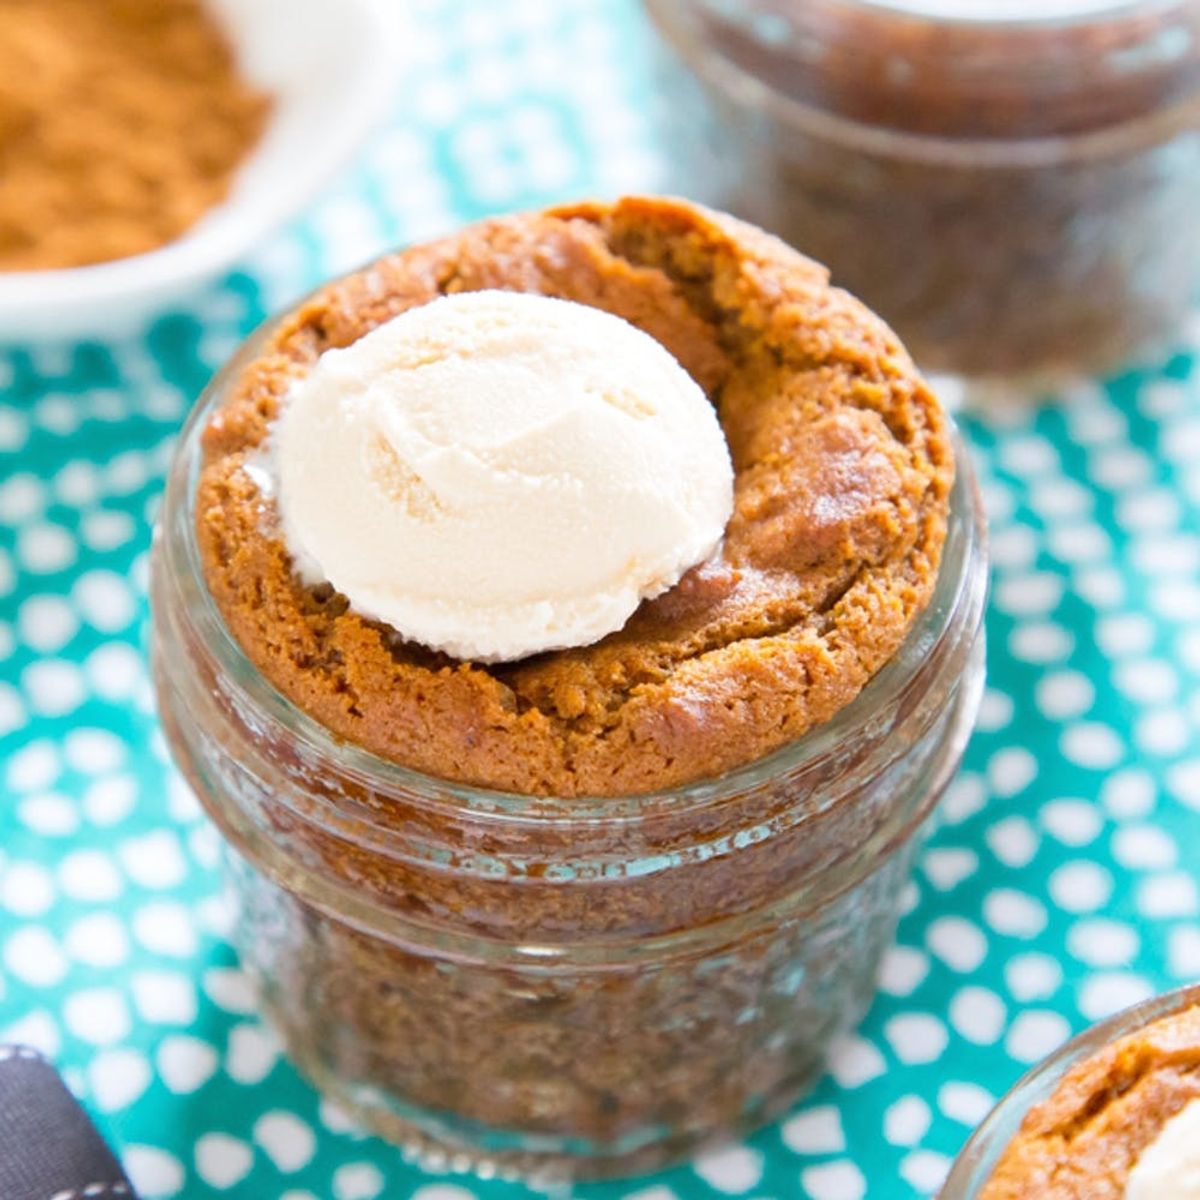 Warm Up With the Cutest Spiced Molasses Cookie (Baked in a Jar!)